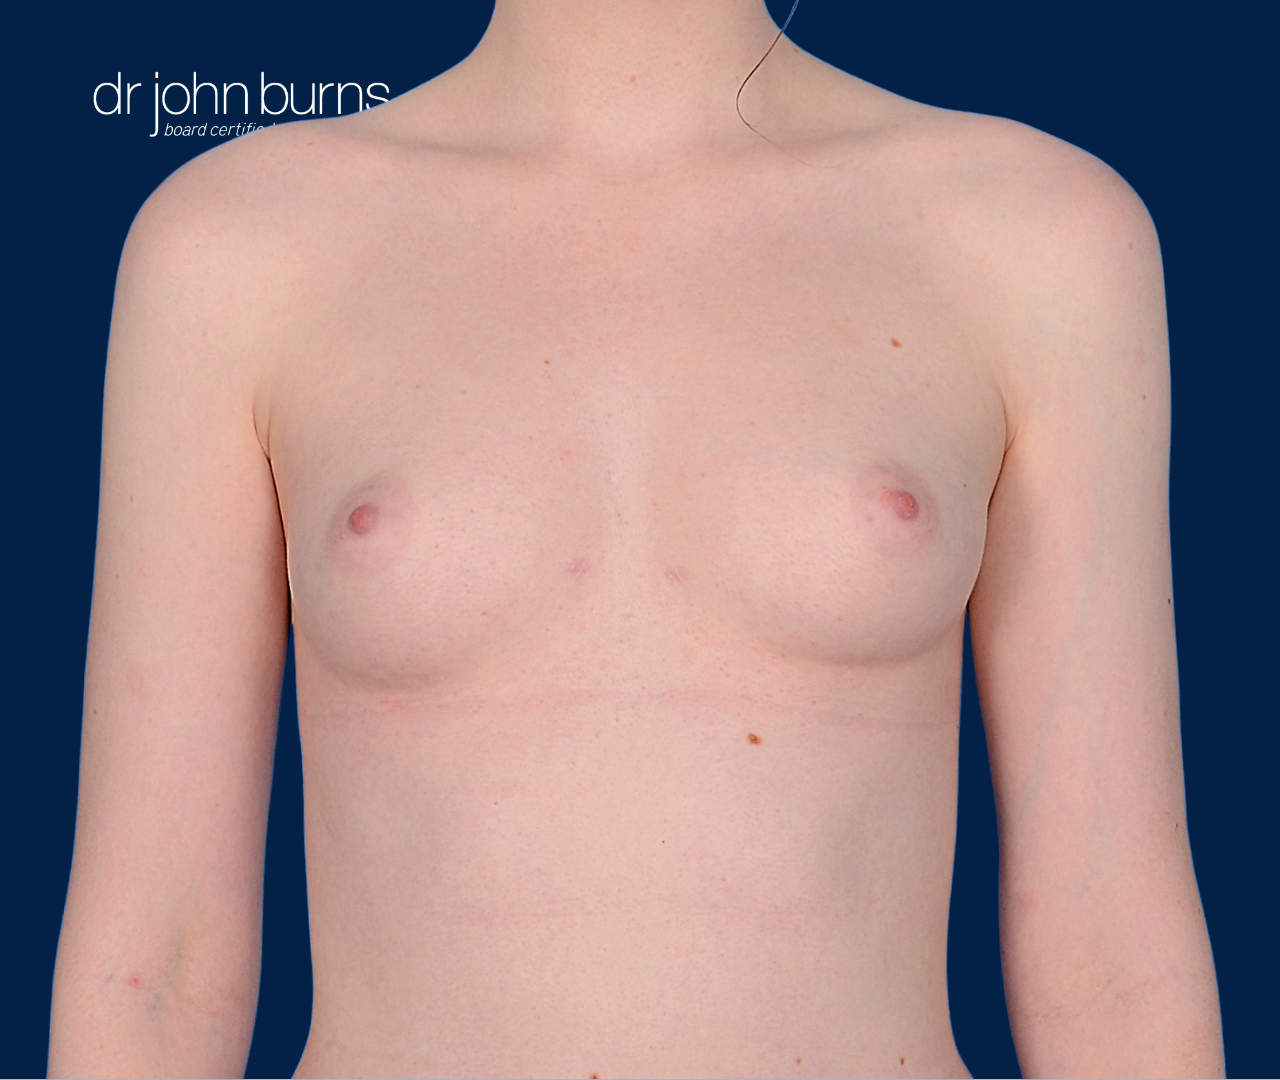 case 12- after fat transfer to breast by top plastic surgeon, Dr. John Burns